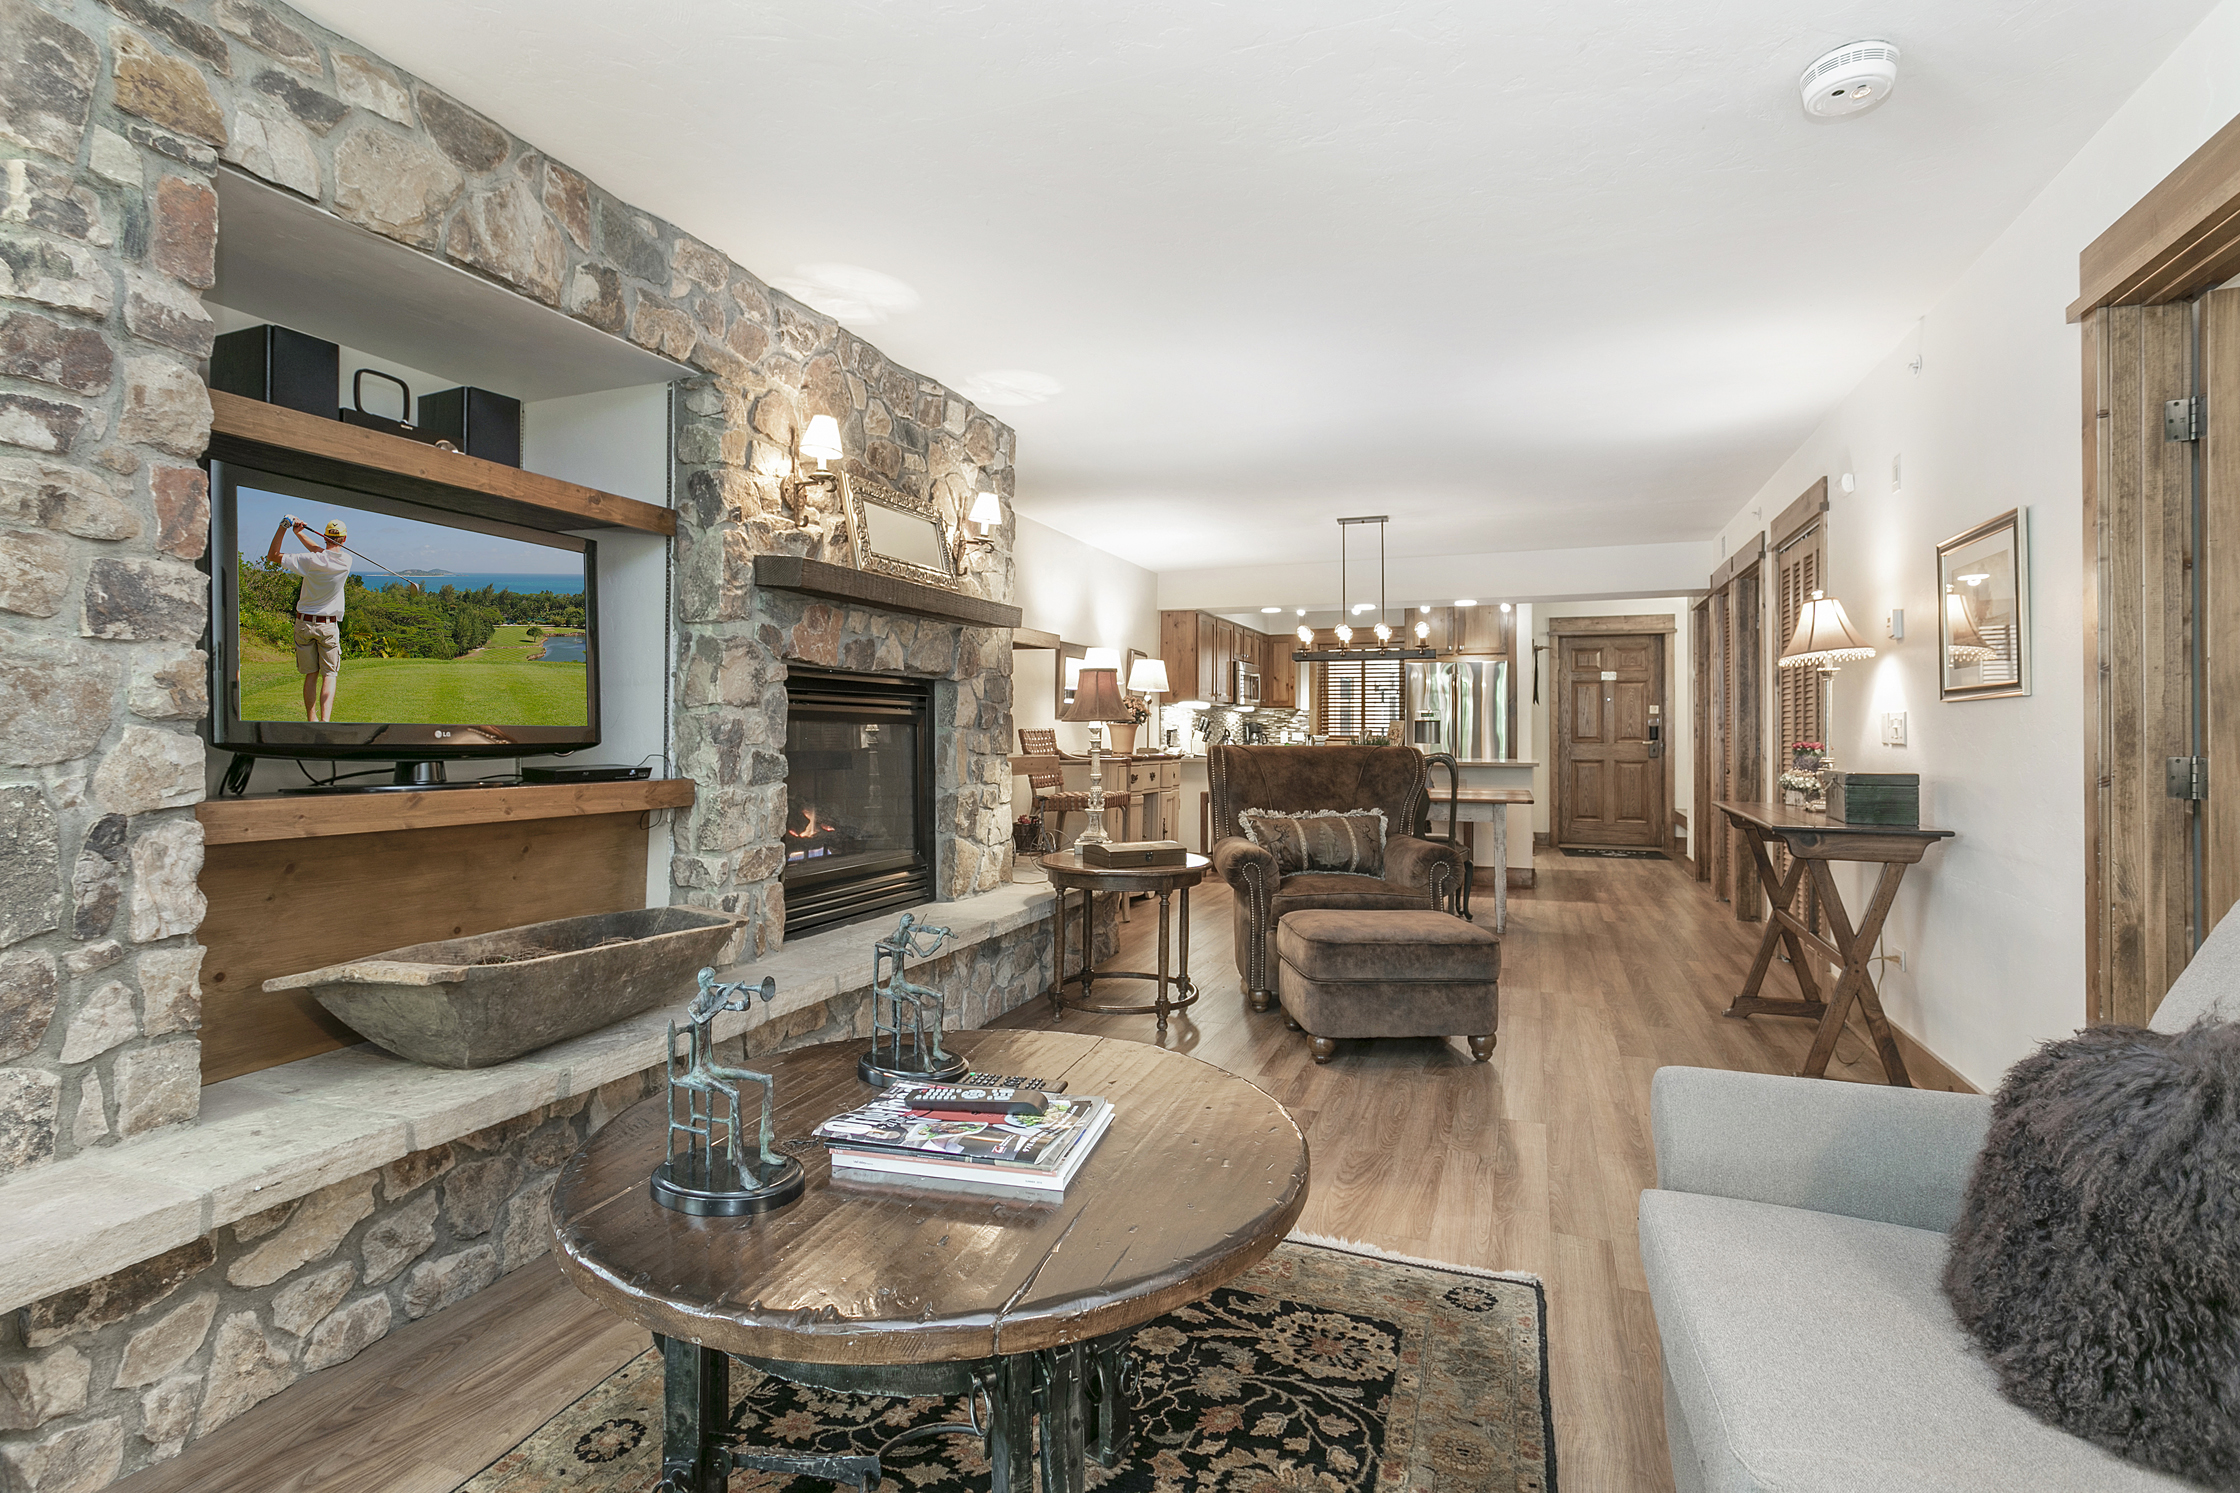 Antlers at Vail condominiums offer home-like amenities with plenty of space for guests to spread out after mountain adventures – while meeting the highest health and safety standards.